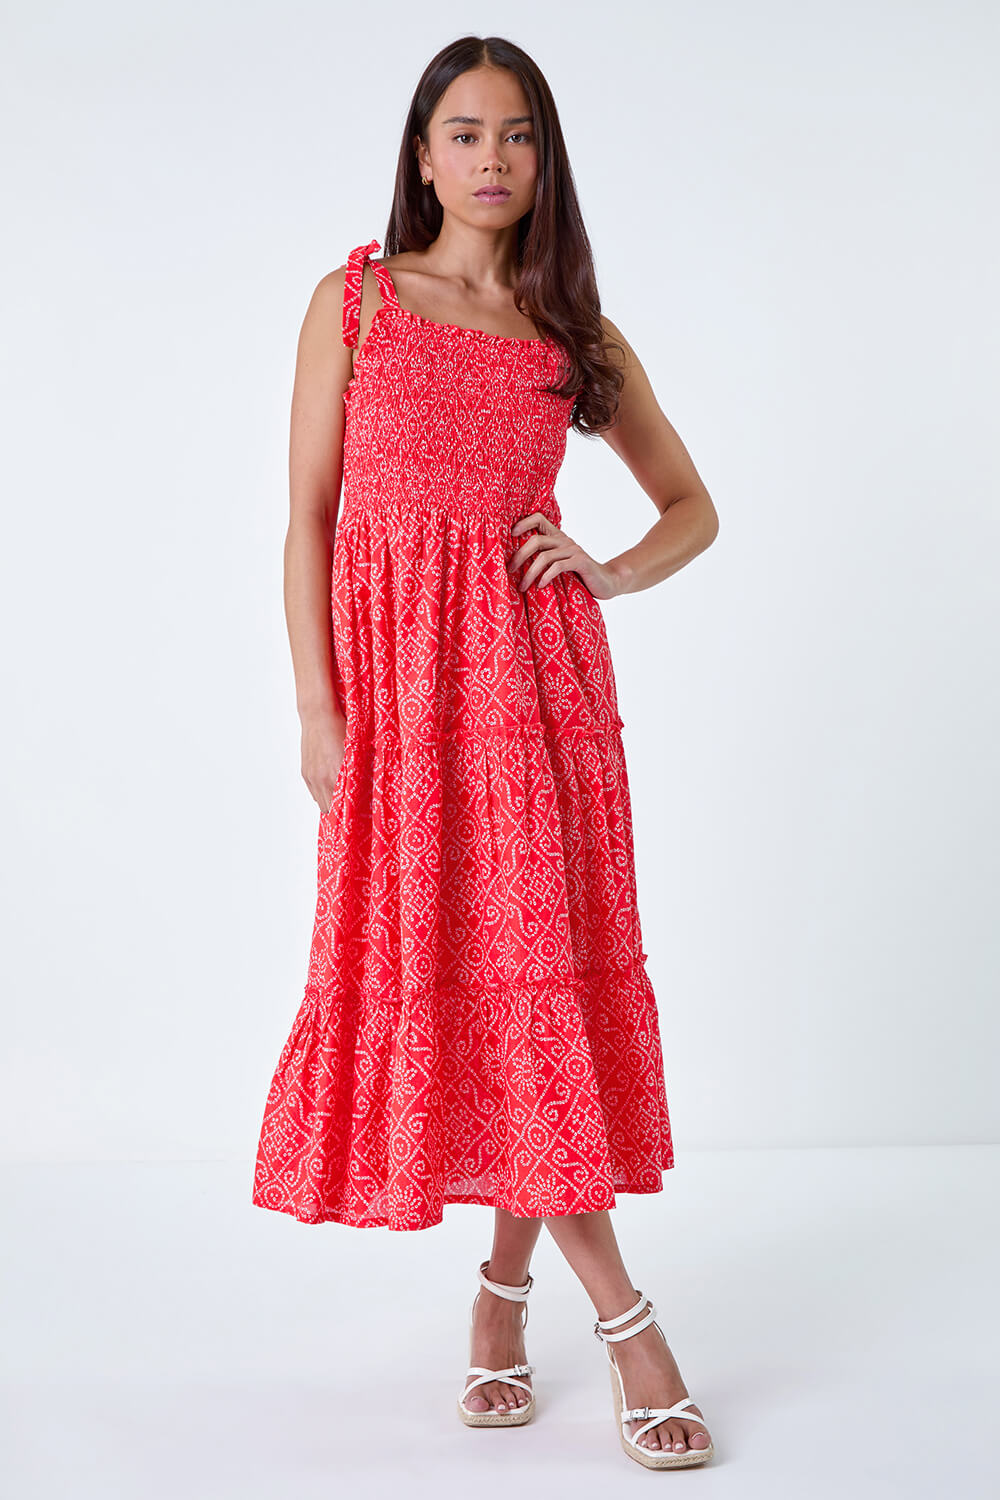 CORAL Petite Cotton Ditsy Print Shirred Maxi Dress, Image 2 of 5